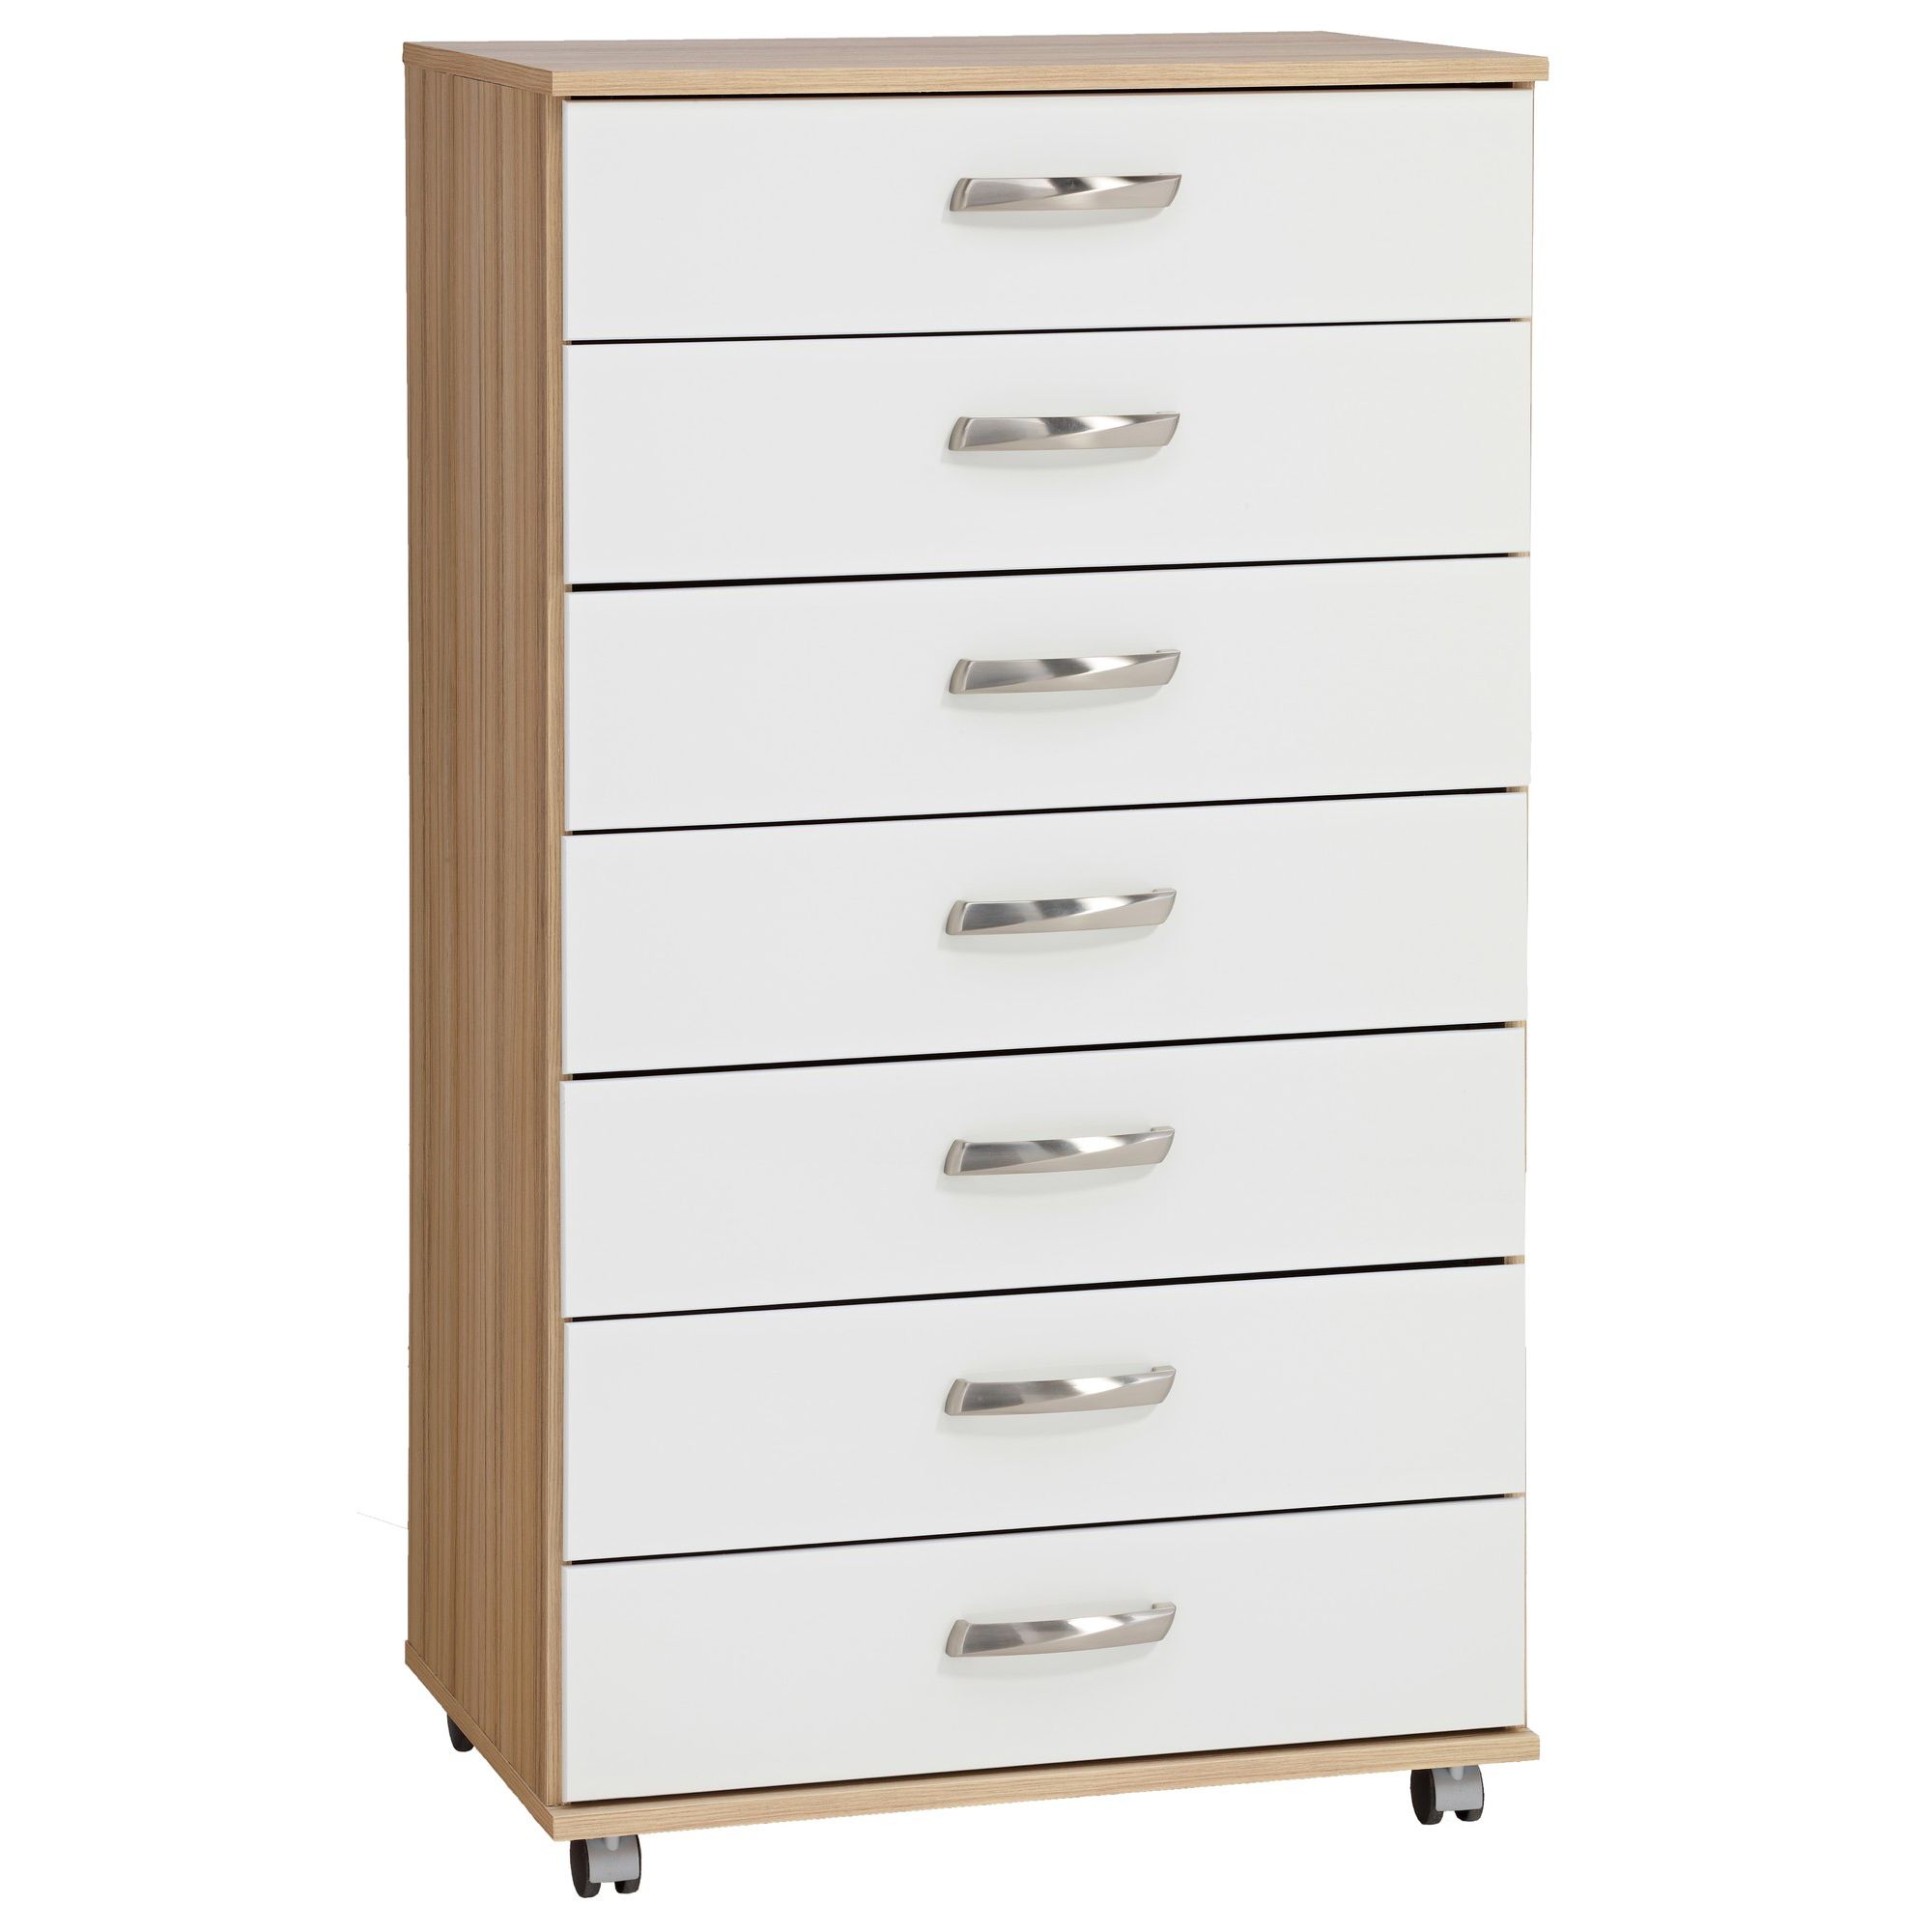 Ideal Furniture Regal 7 Drawer Chest in white at Tesco Direct